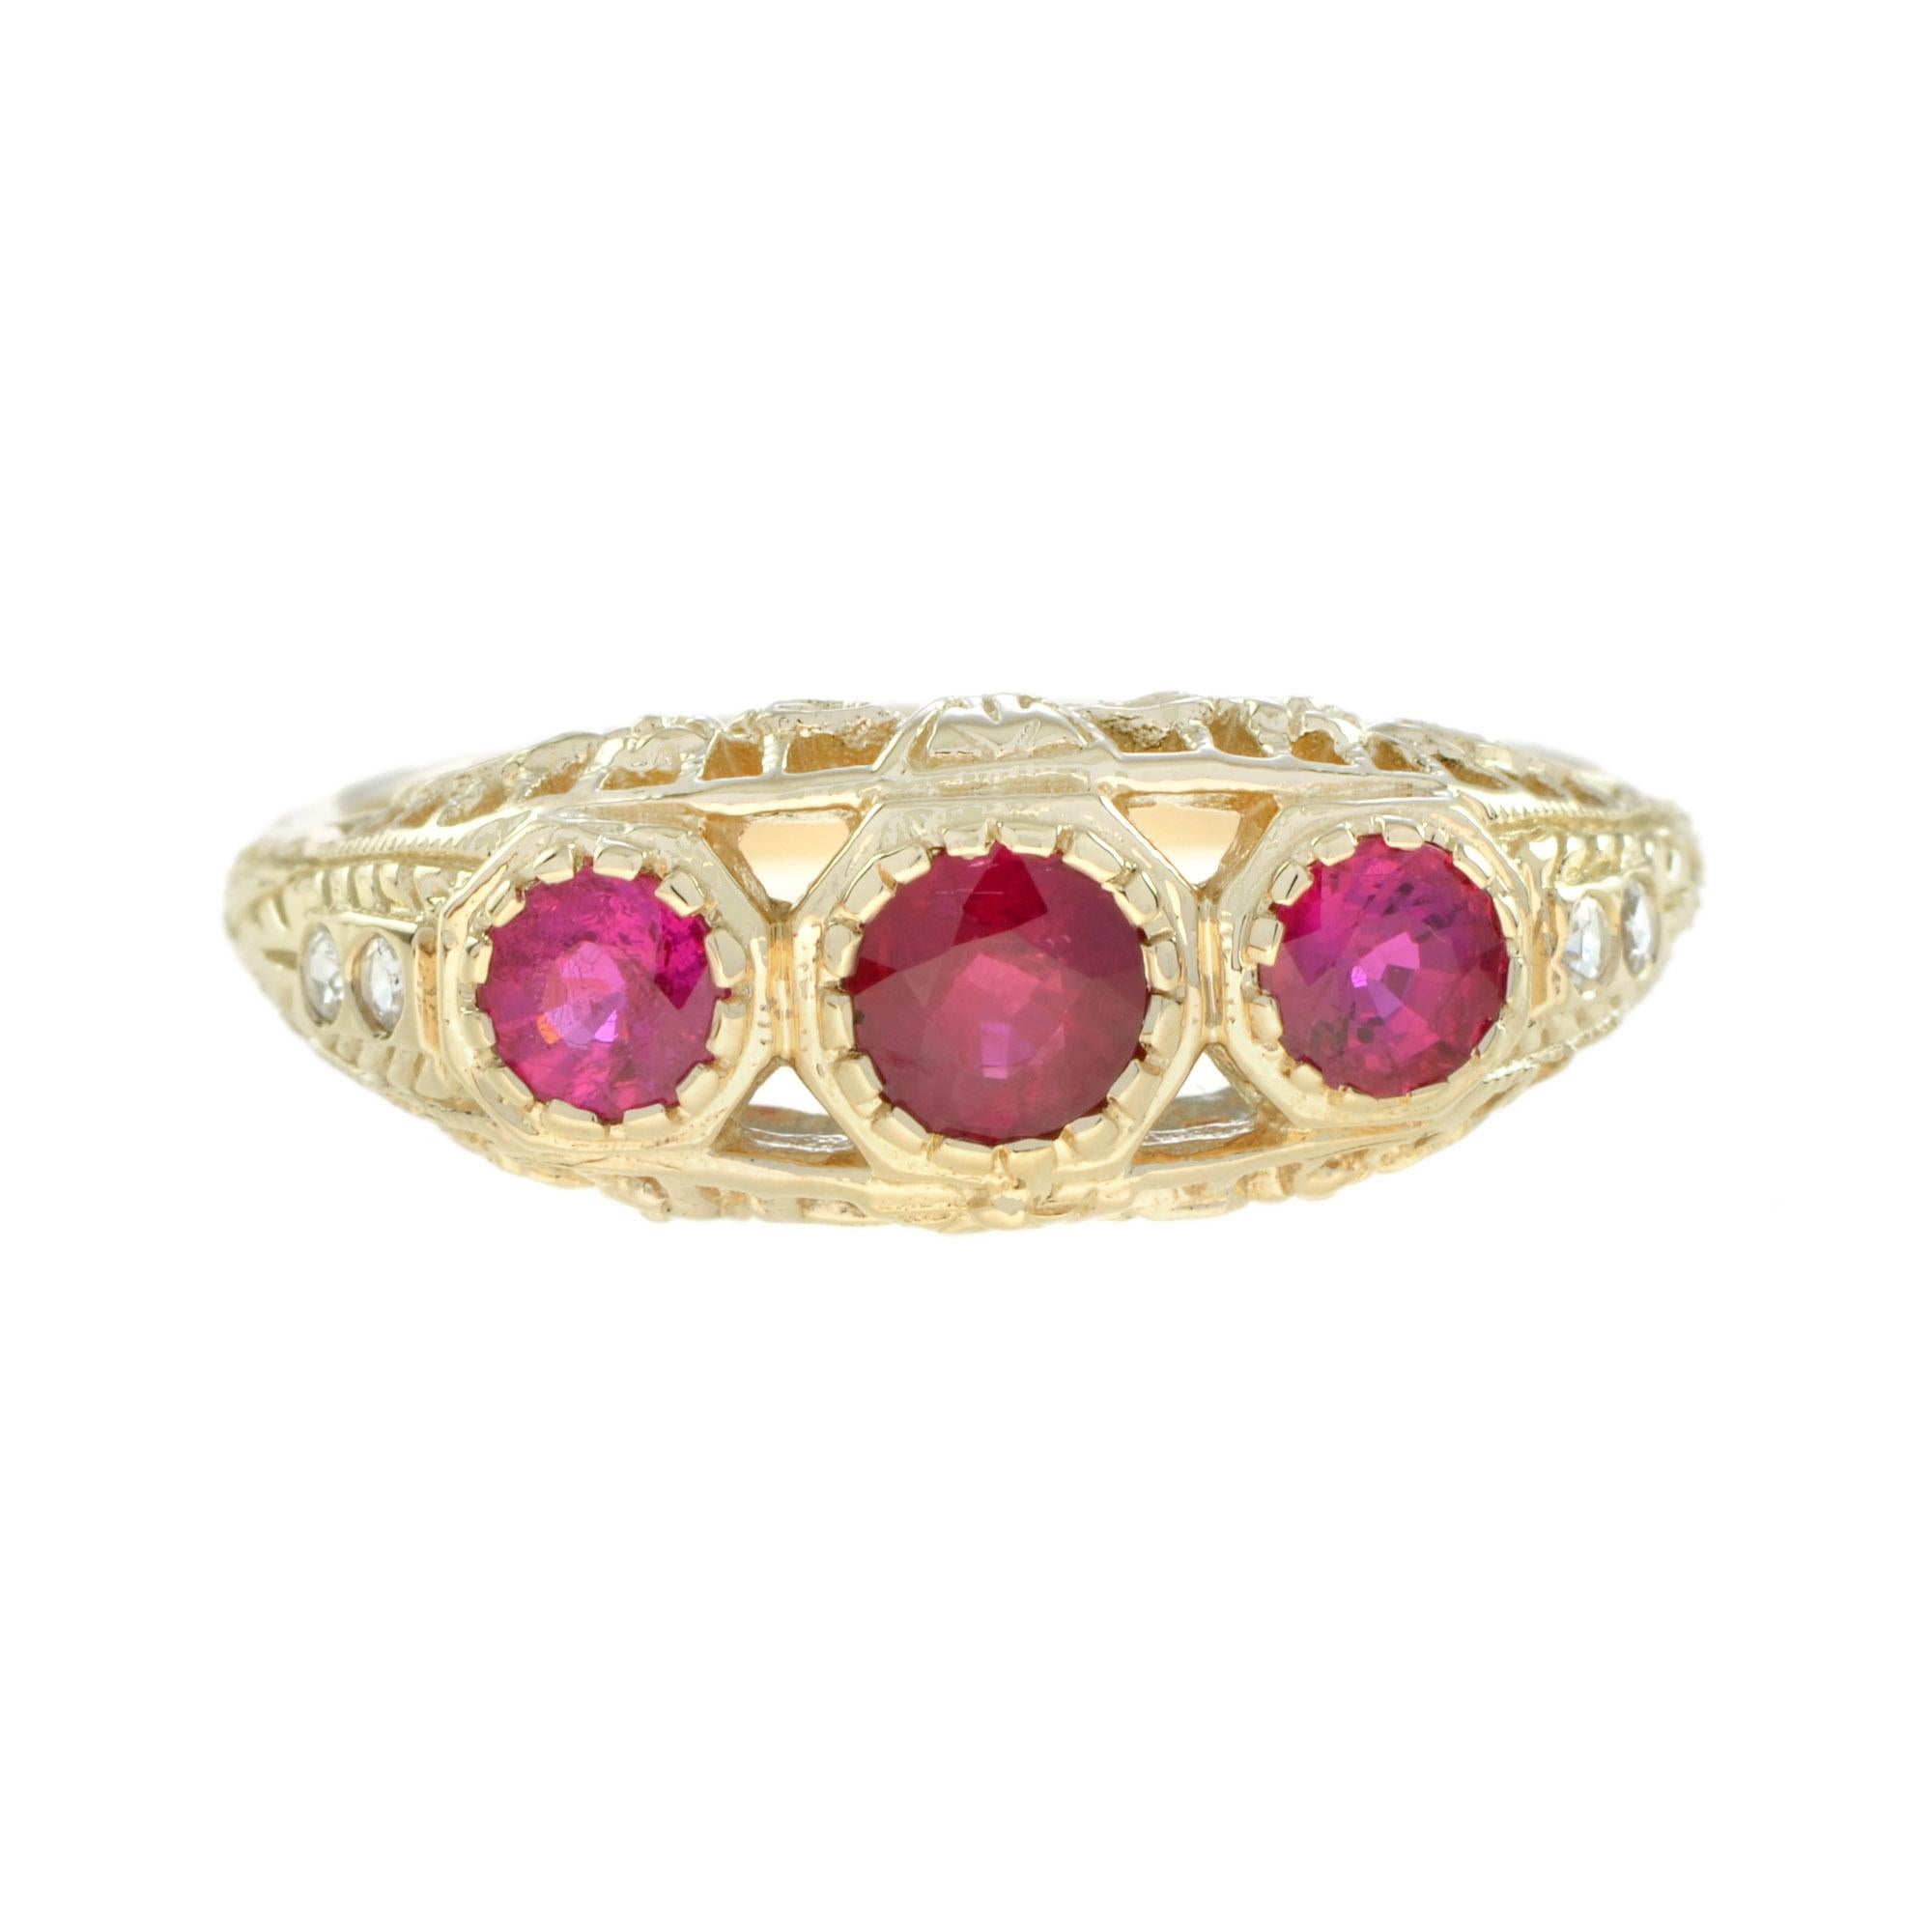 This stunning three stone filigree ruby Edwardian engagement ring in 14k yellow gold showcases a beautiful natural round rubies of 0.79 carat. The detailed vintage style filigree openwork design is finely decorated with millgrain edging. The outside